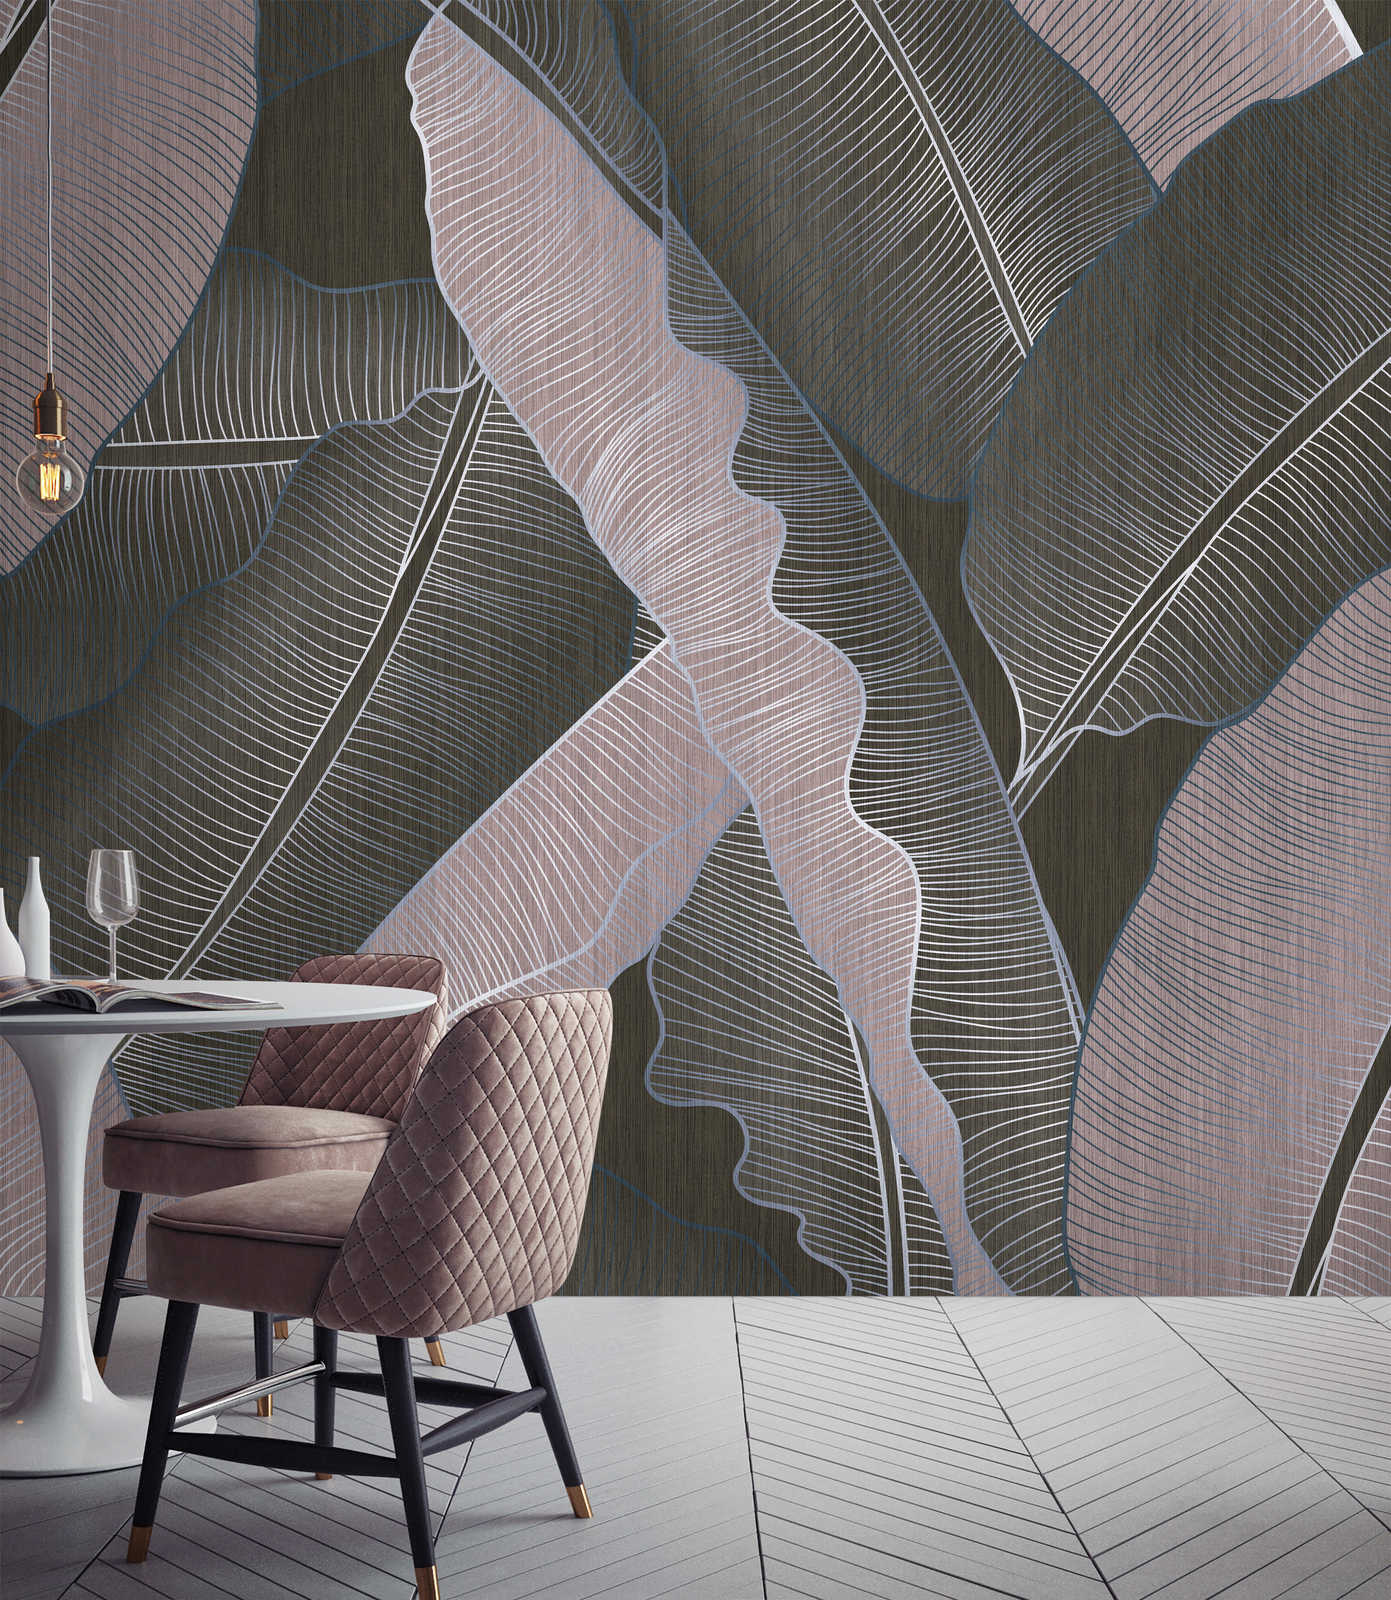             Under Cover 2 - Palm Leaf Wallpaper Grey & Pink in Drawing Style
        